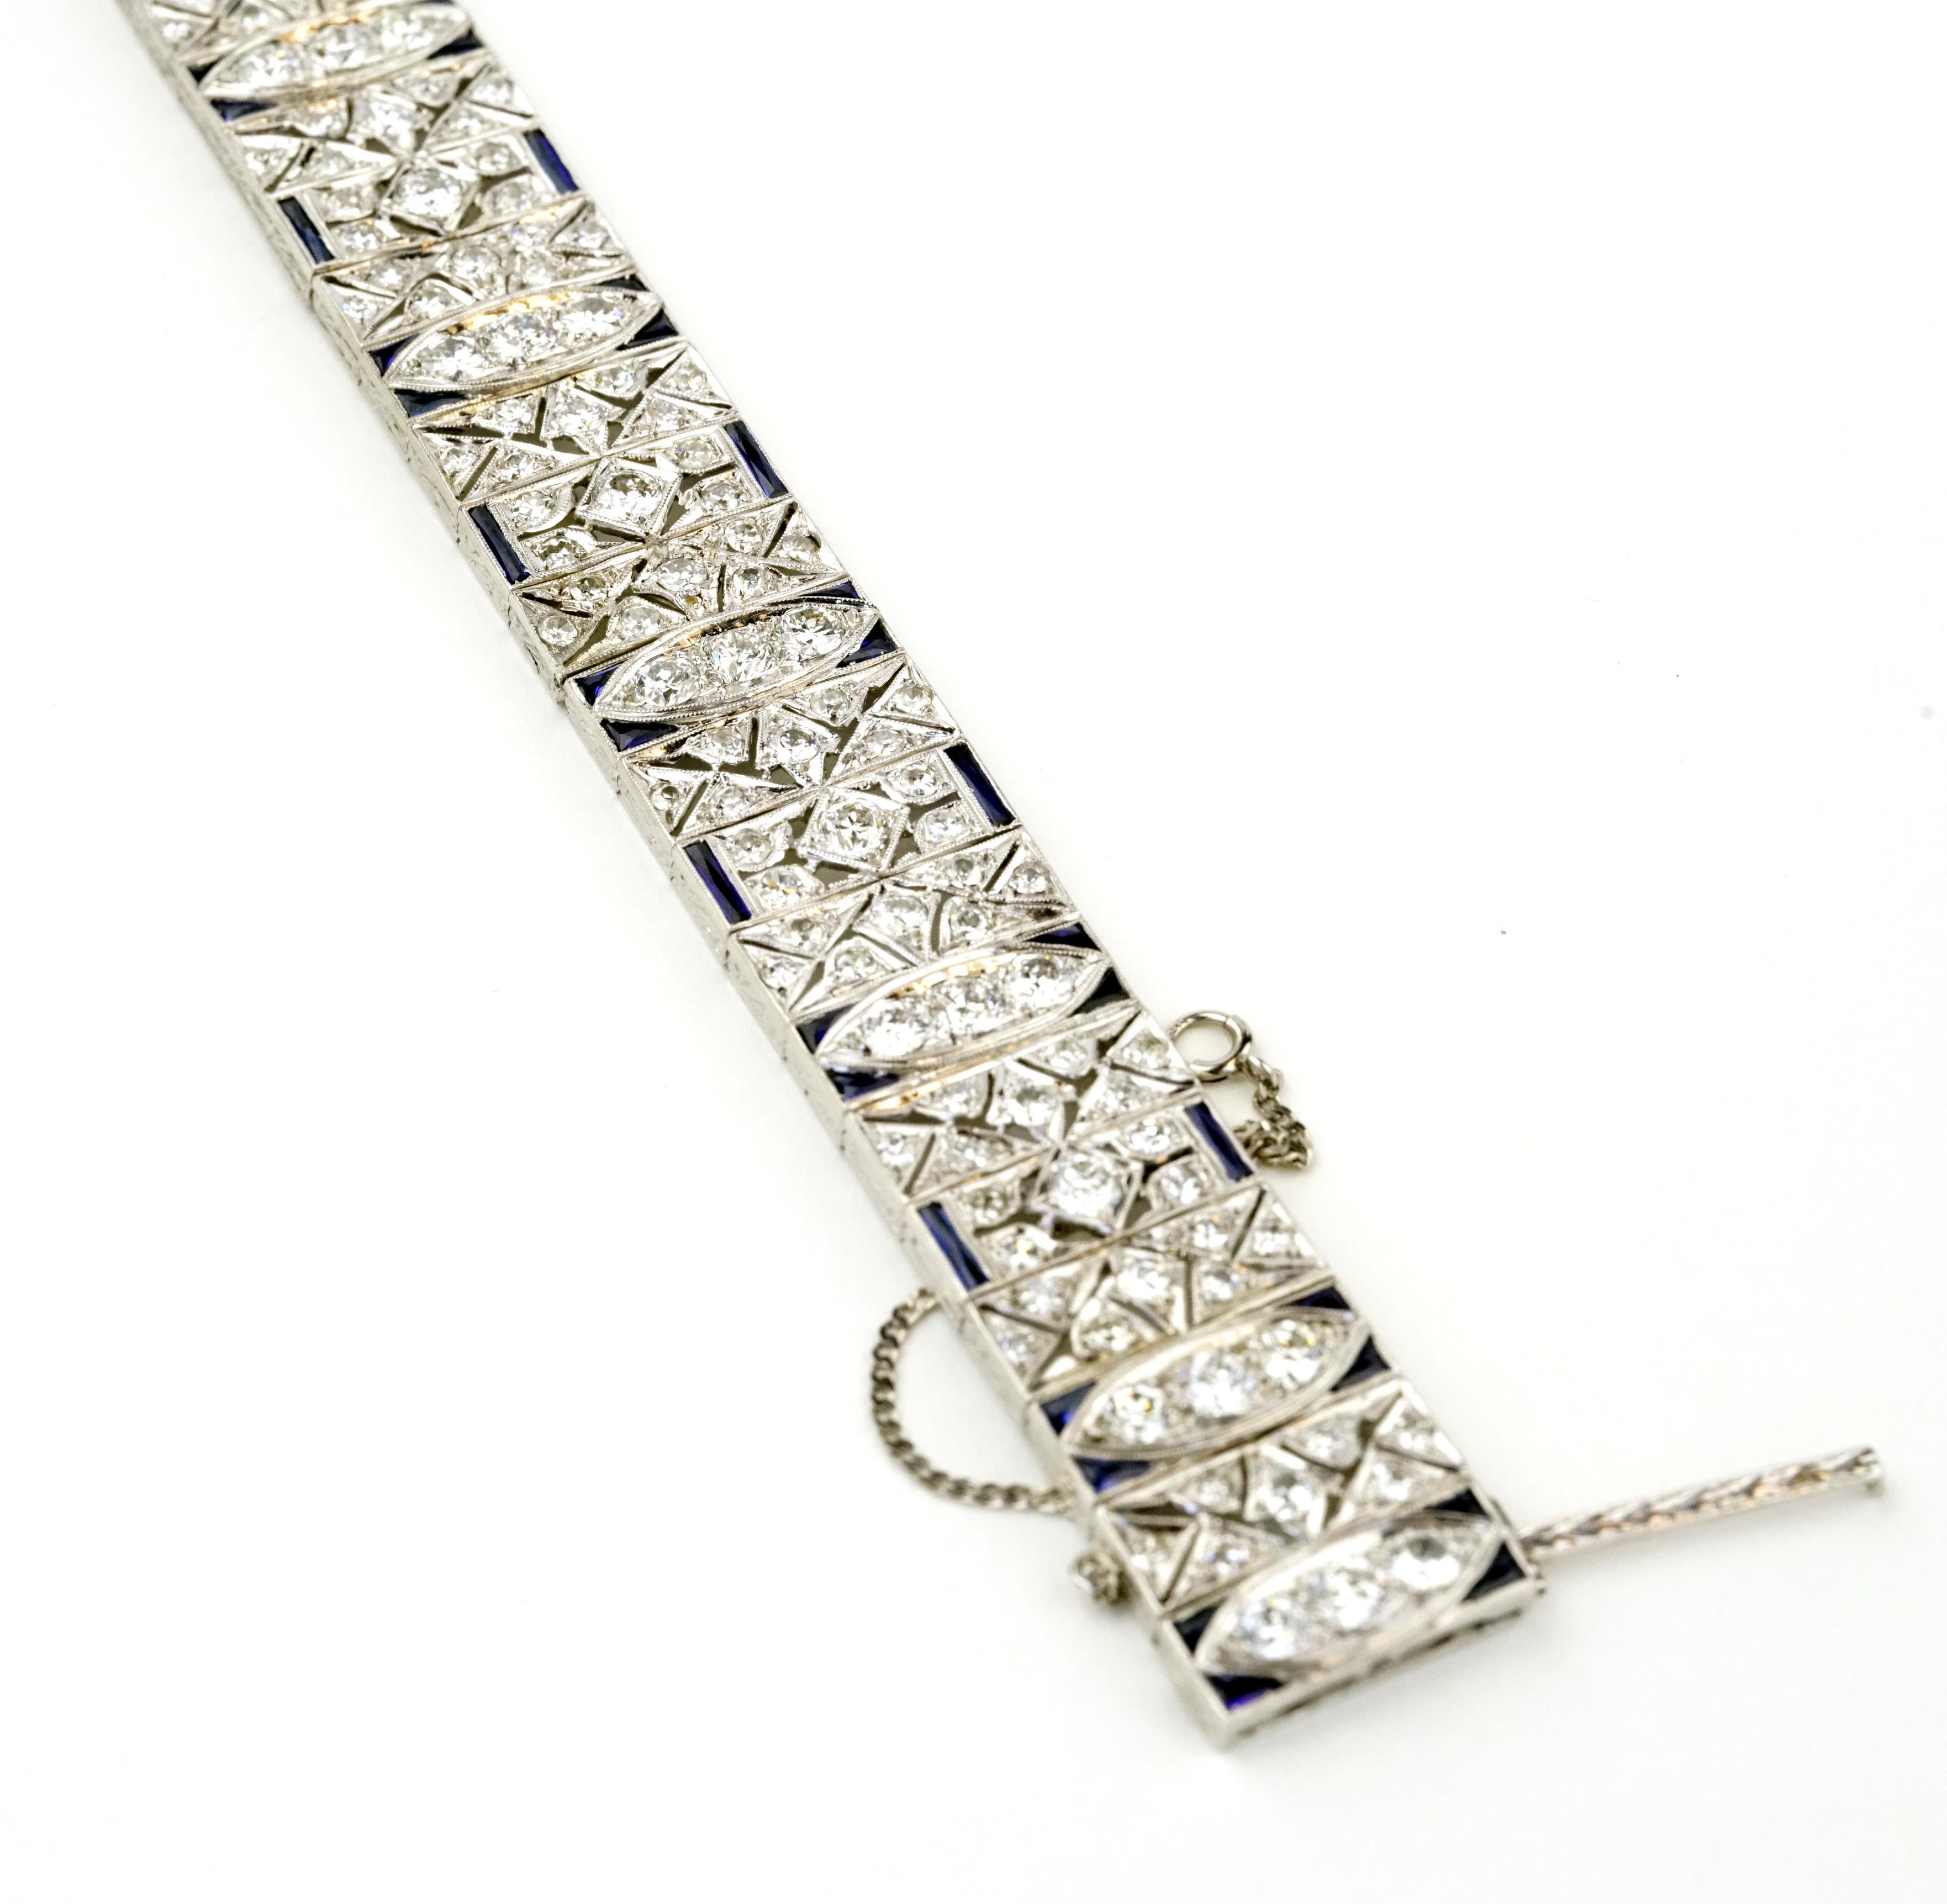 Original Hand Made Art Deco 1930's Diamonds and Sapphires Extremely Rare Bracelet.
Stunning 10.01 Carats total of natural old European cut and single cut diamonds E-F in color , VS1-2 clarity . The diamonds accented along with natural baguette cut